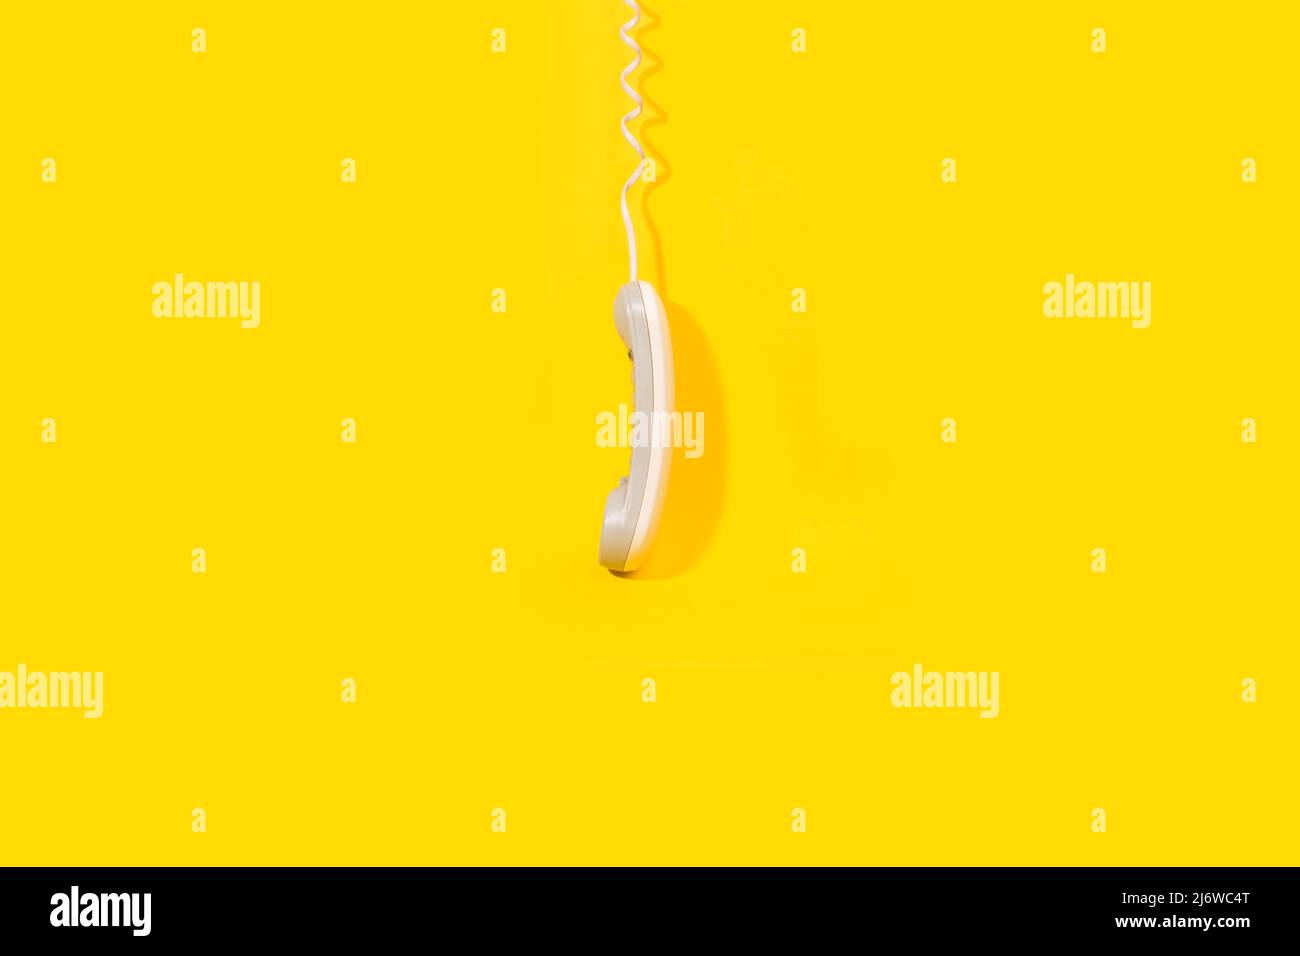 A digital telephone receiver hanging down on a yellow background with copy space Stock Photo